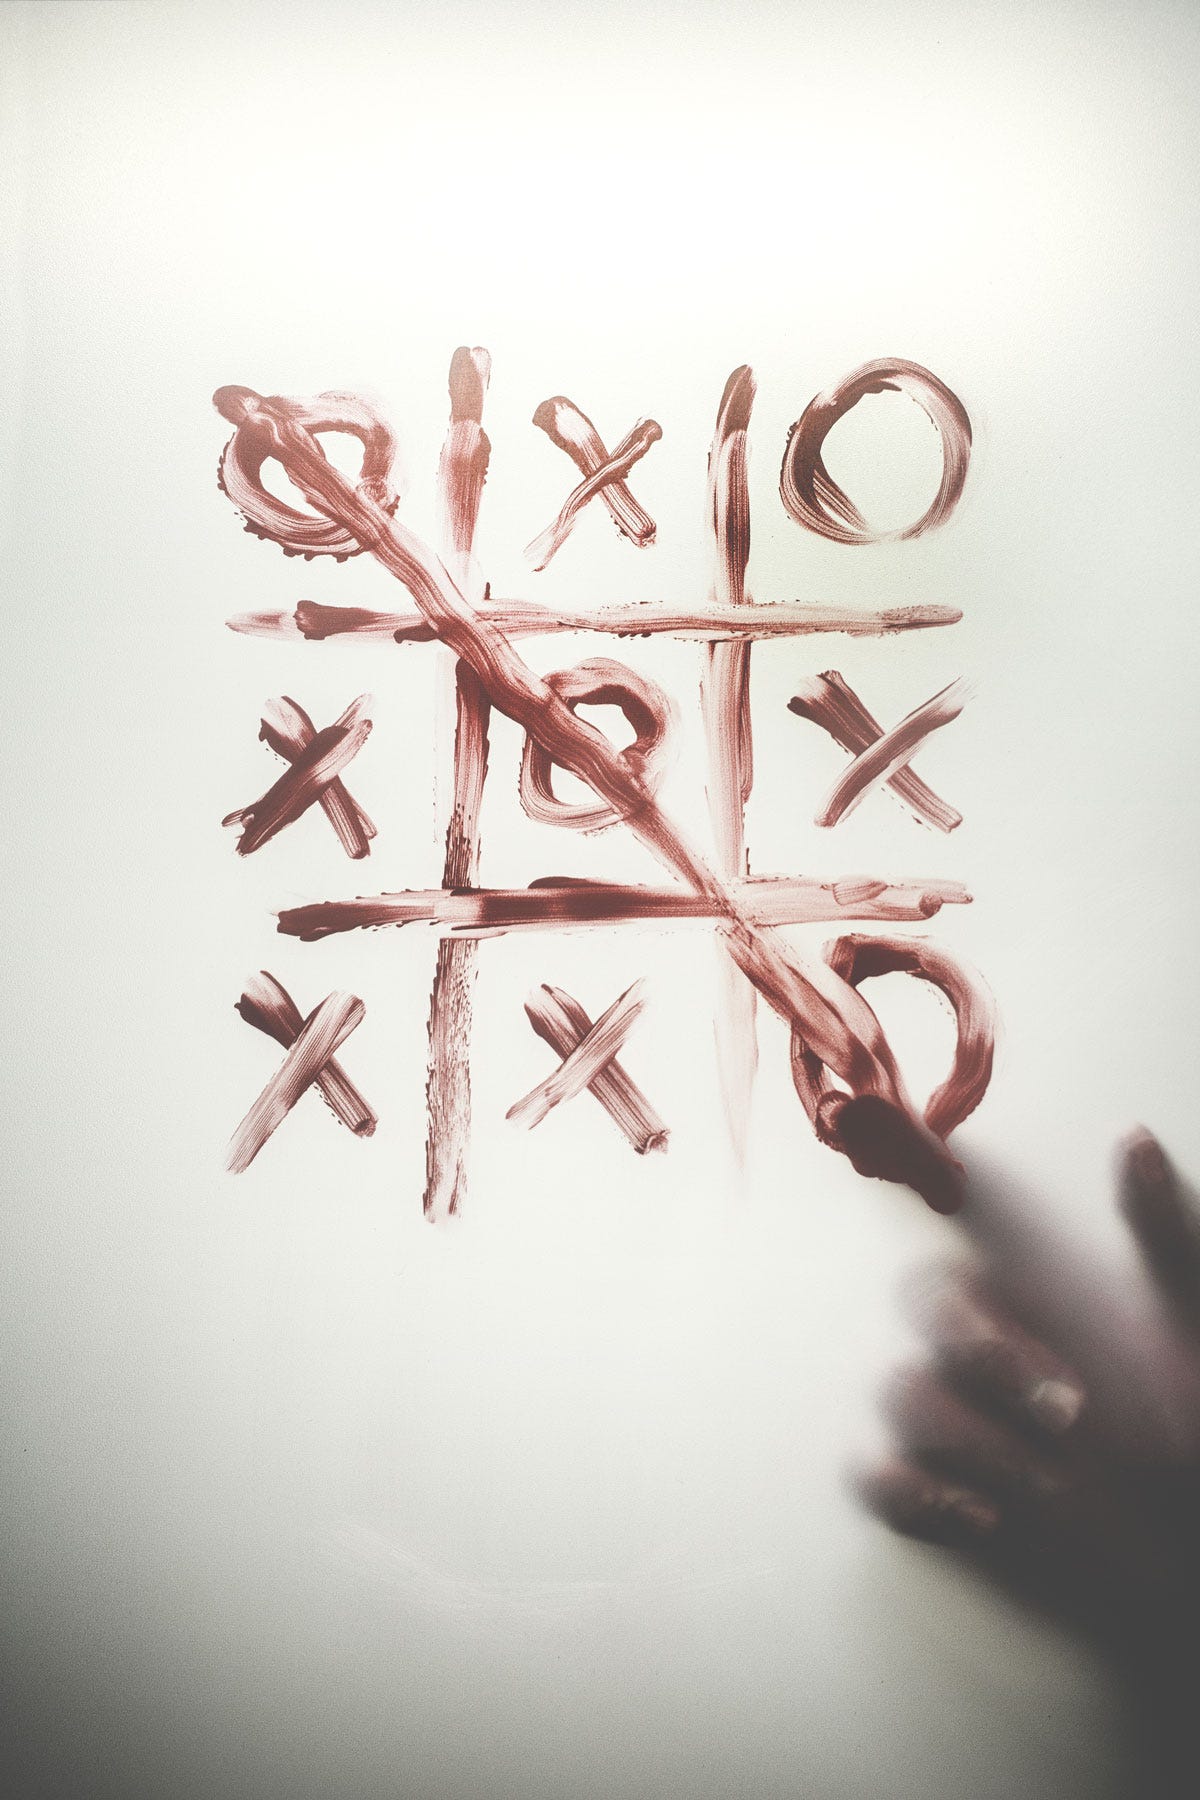 Mistakes Were NOT Made: Bloody Tic Tac Toe Game